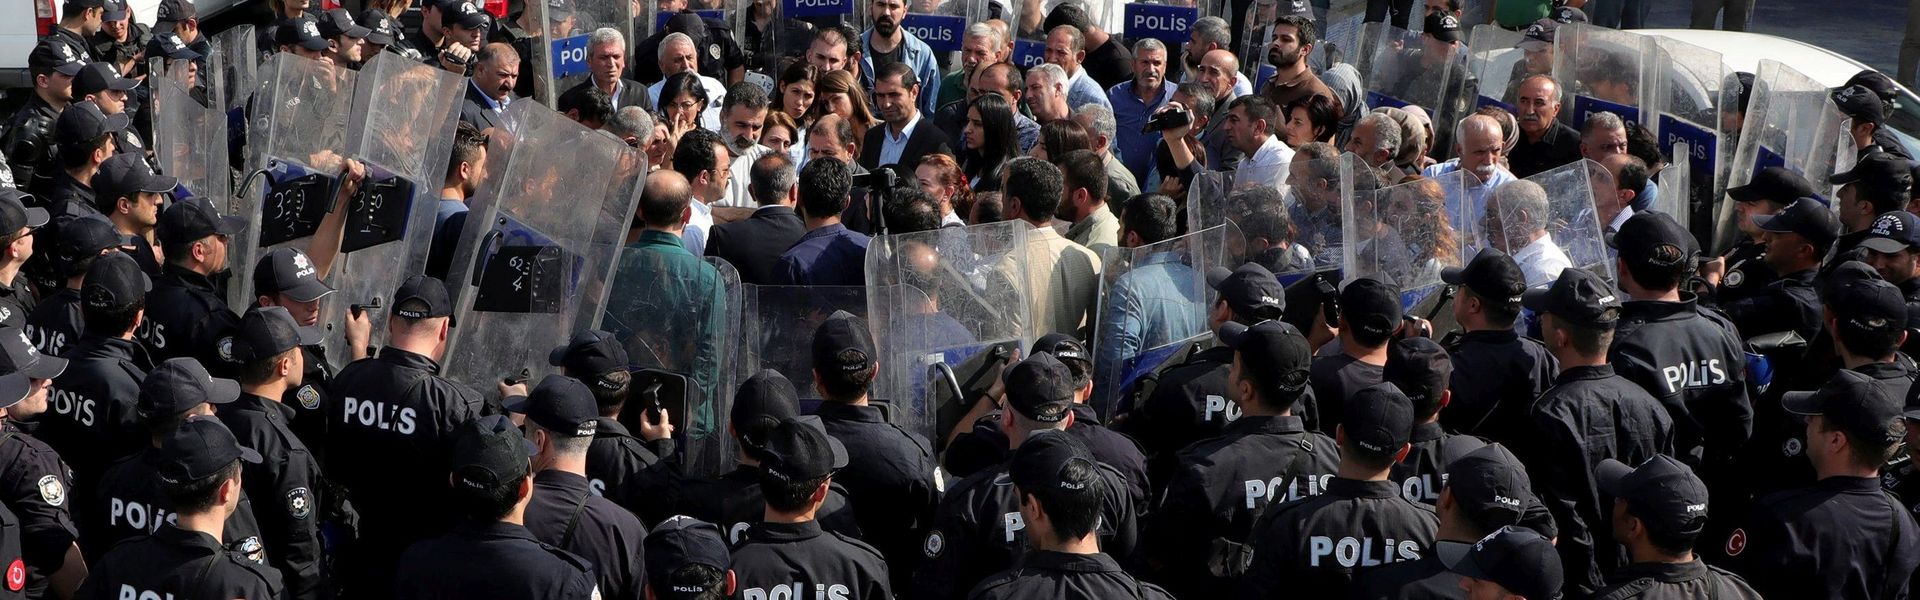 HDP Members of Parliament protest against the arrest of their local politicians in October 2019